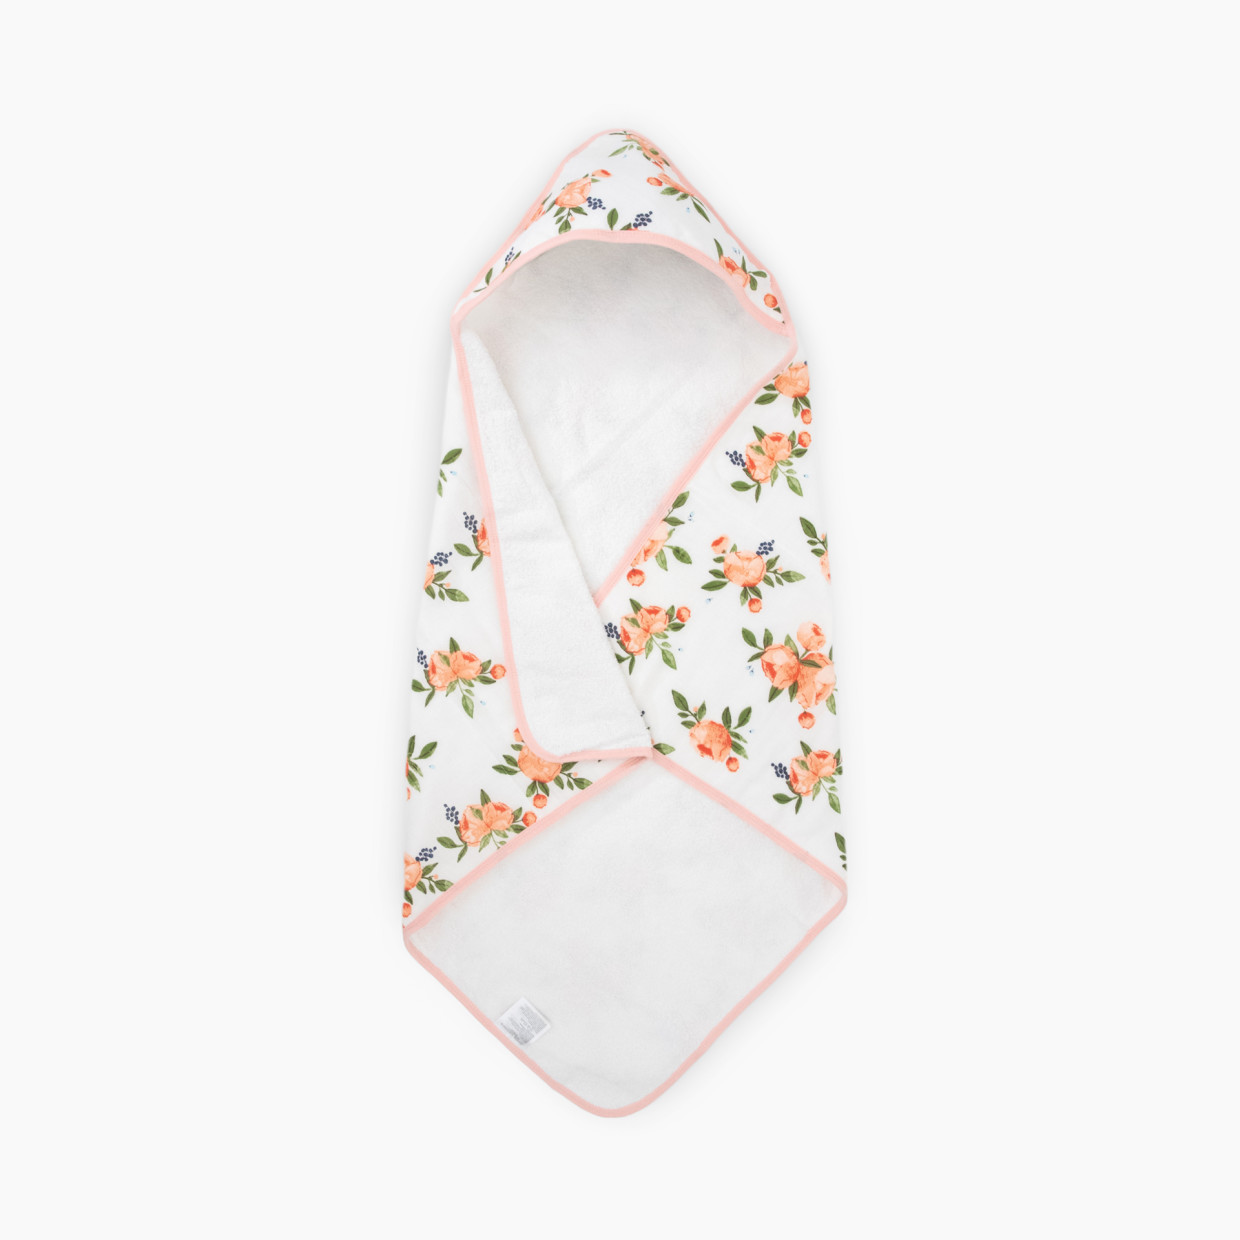 Little Unicorn Cotton Muslin & Terry Infant Hooded Towel - Watercolor Roses.